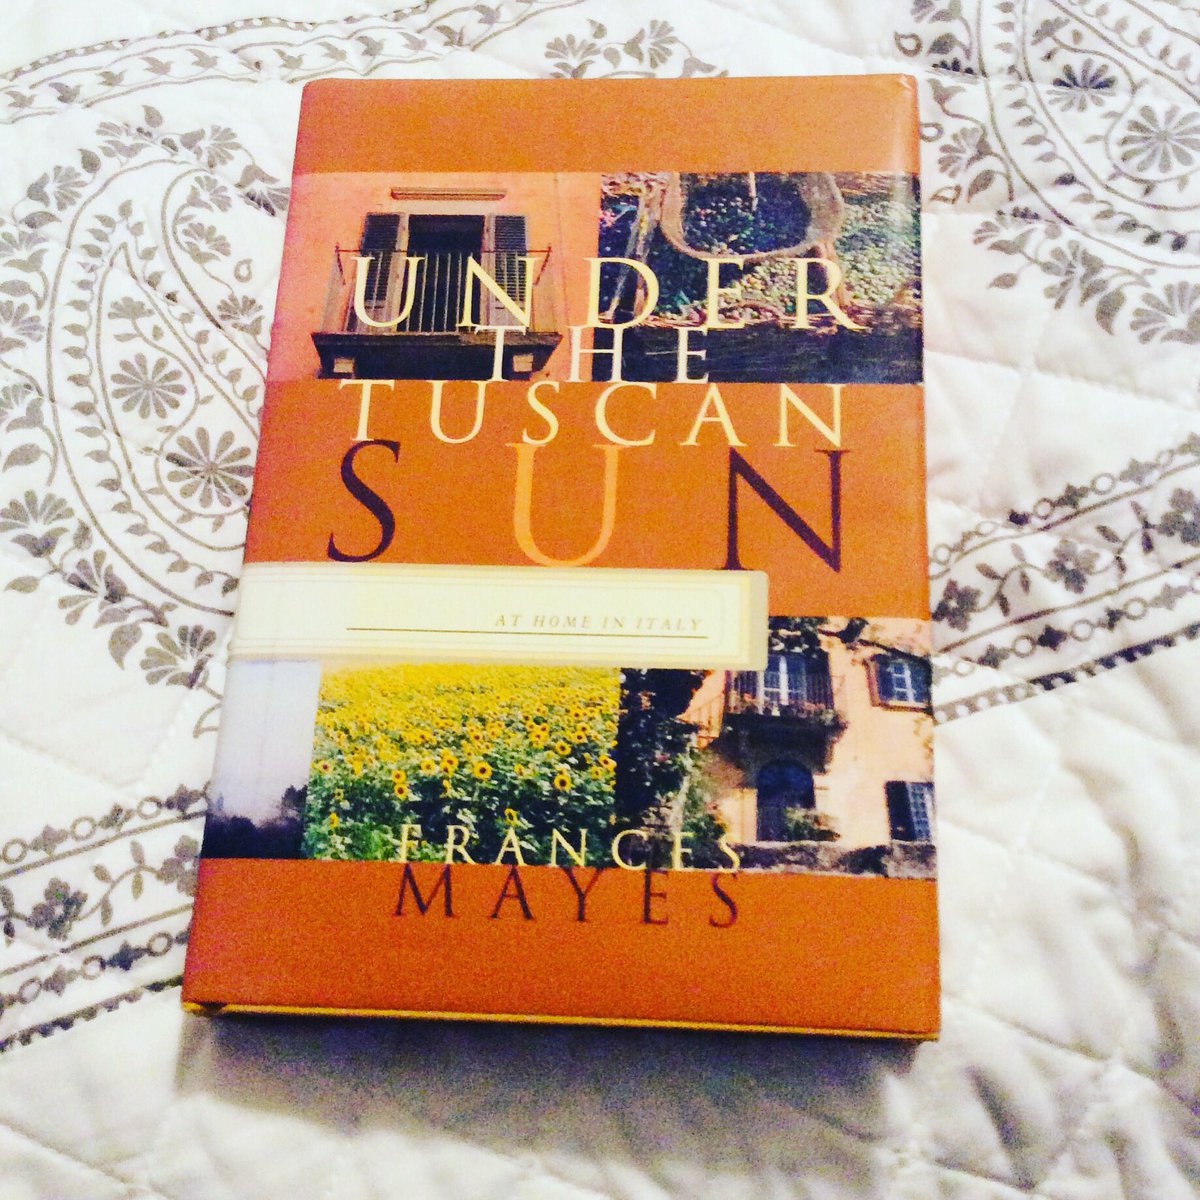 One of those times when you can resist anything but temptation 🙂

The self imposed ban on buying books, lifted slightly for this favorite. From the library sale 

#booksofinstagram #bookstagrammer #underthetuscansun #francesmayes   #chroniclebooks #booklover #reminiscingthereads